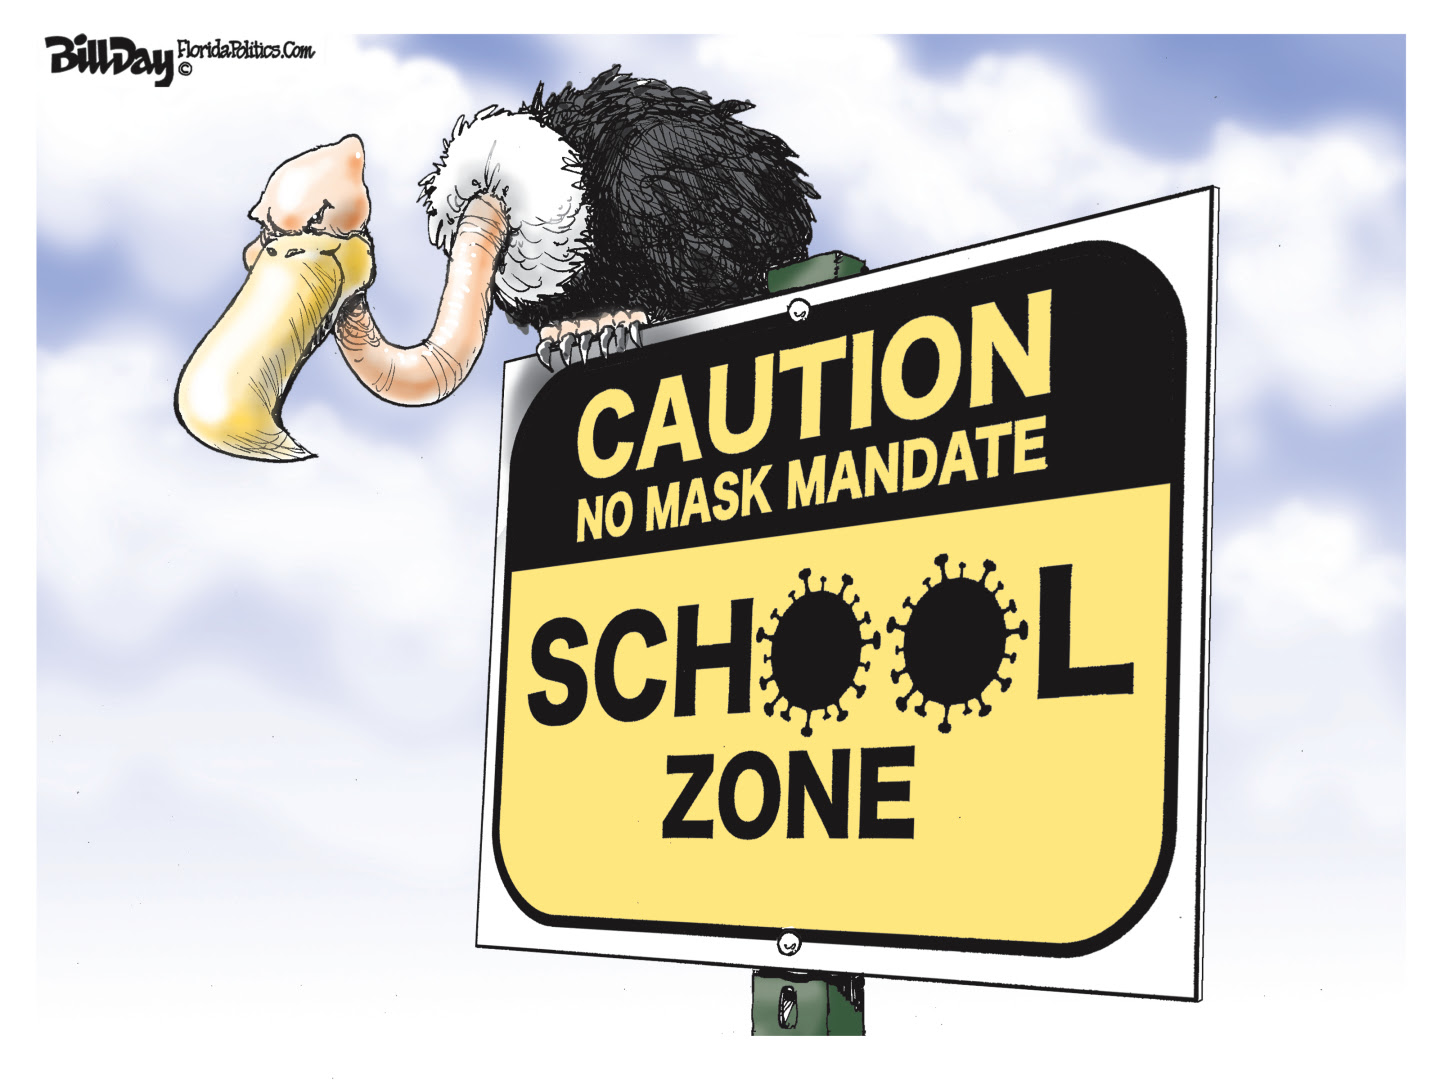 Republicans challenge mask mandates that would protect put school children at risk for the sake of scoring political points.